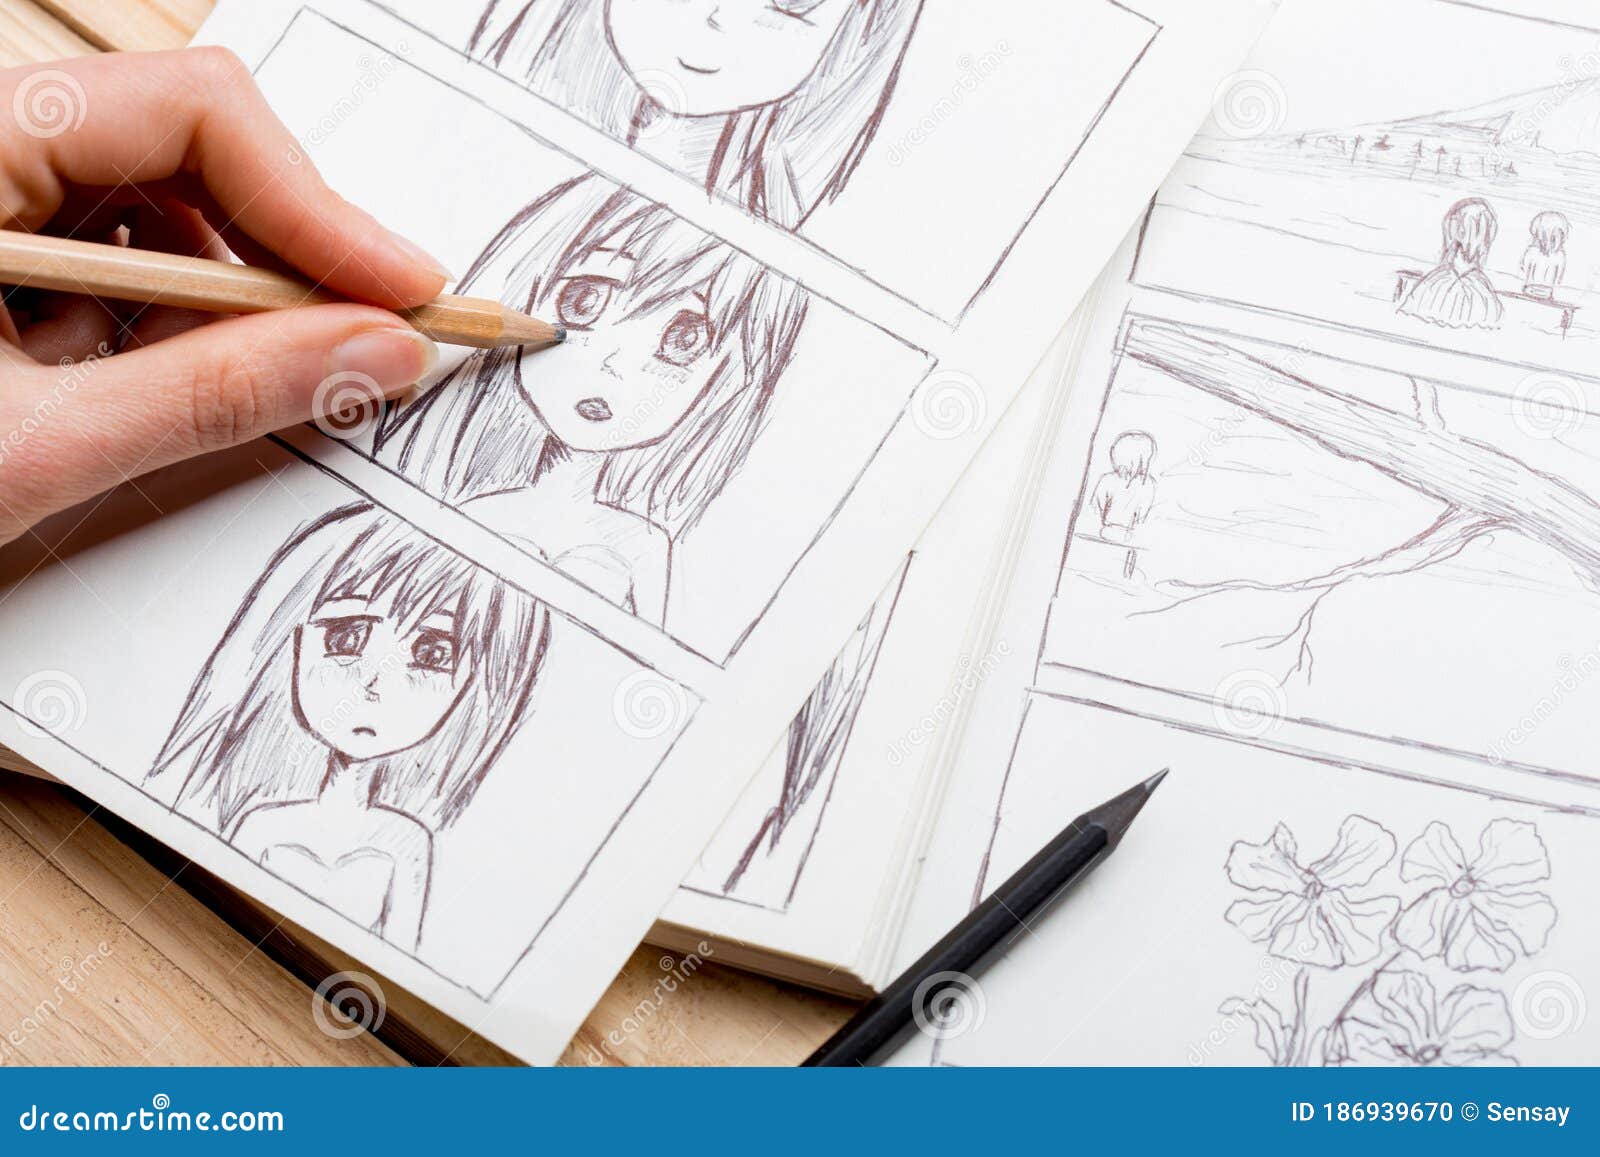 1111 Anime Drawing Stock Photos  Free  RoyaltyFree Stock Photos from  Dreamstime